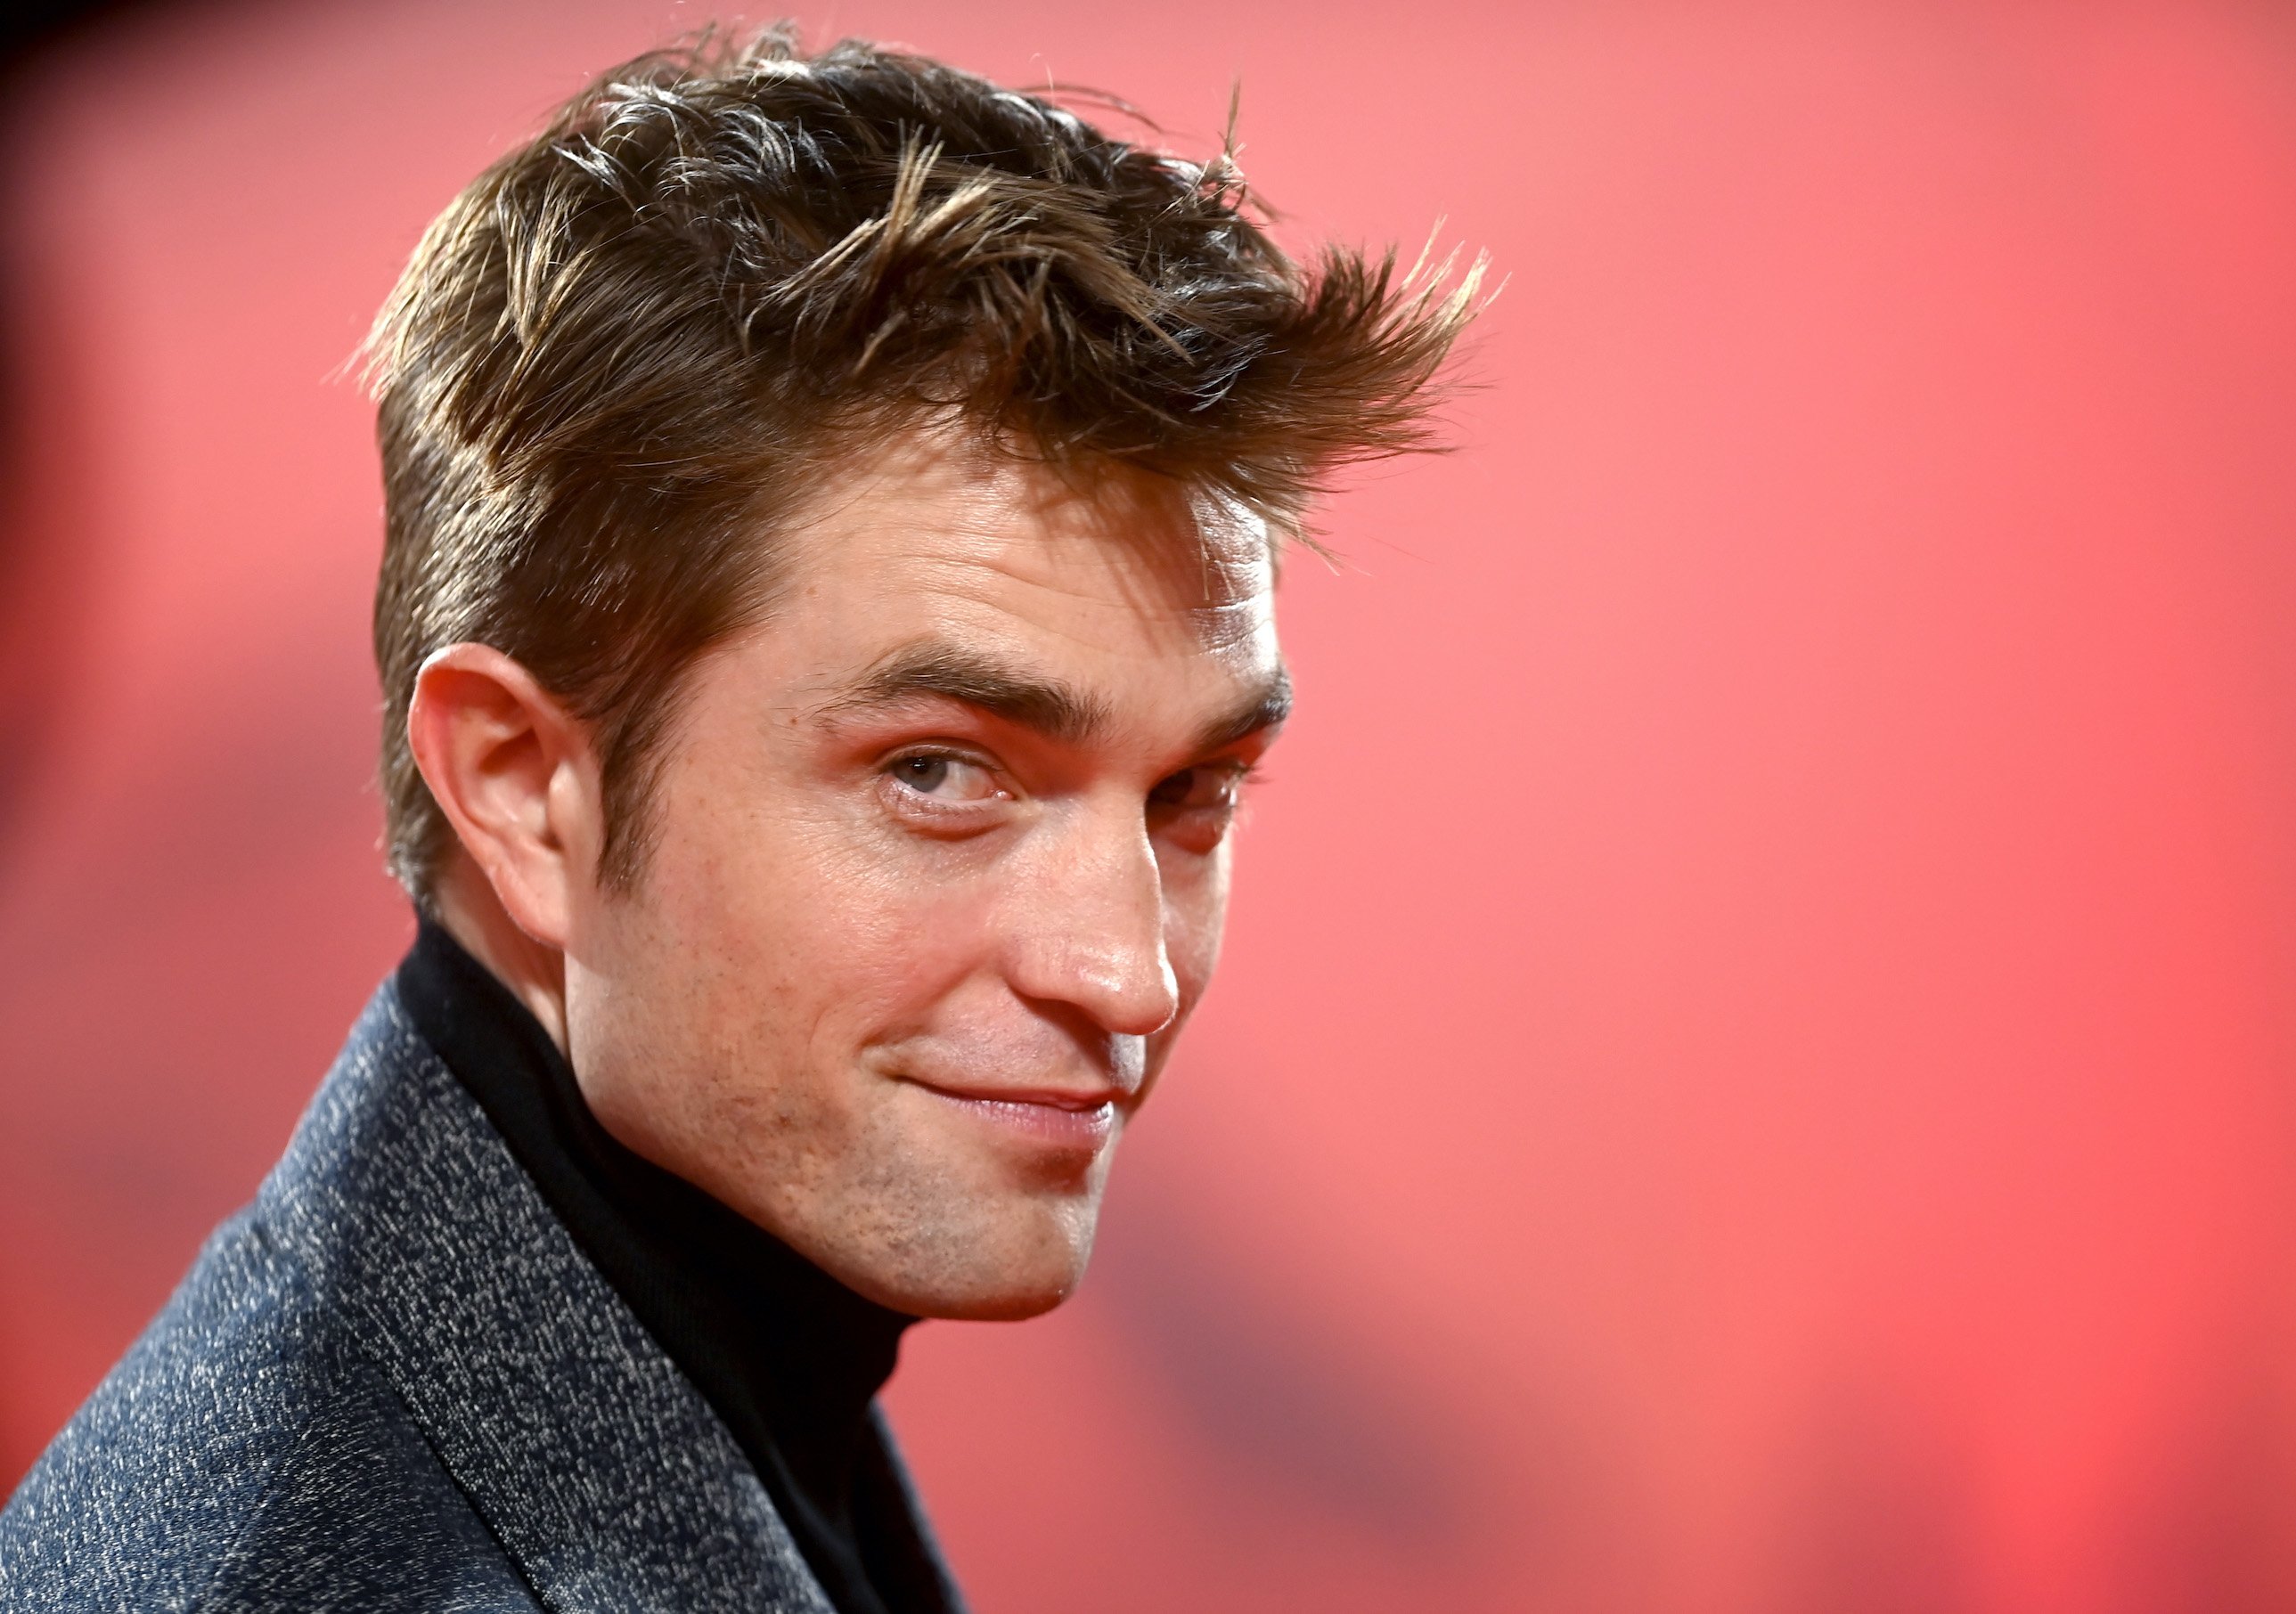 Robert Pattinson attends ta special screening for the movie The Batman